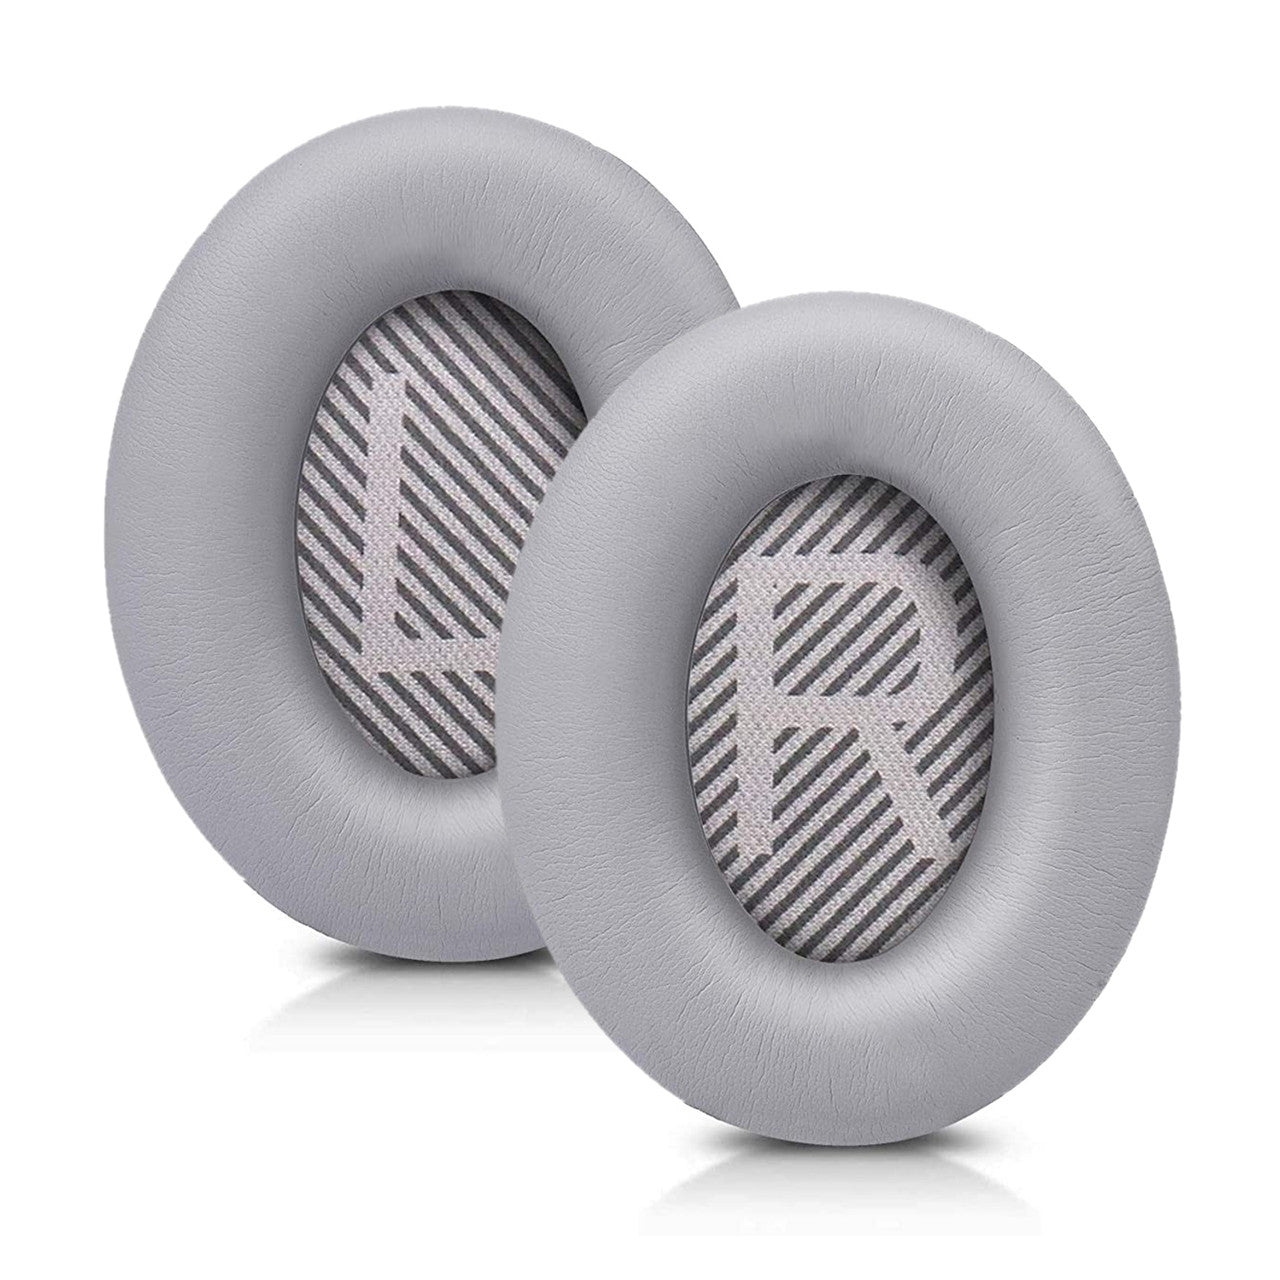 Professional Replacement Ear Pads Cushions, Earpads Compatible with Boses QuietComfort 35 (Boses QC35) and Quiet Comfort 35 II (Boses QC35 II) Over-Ear Headphones